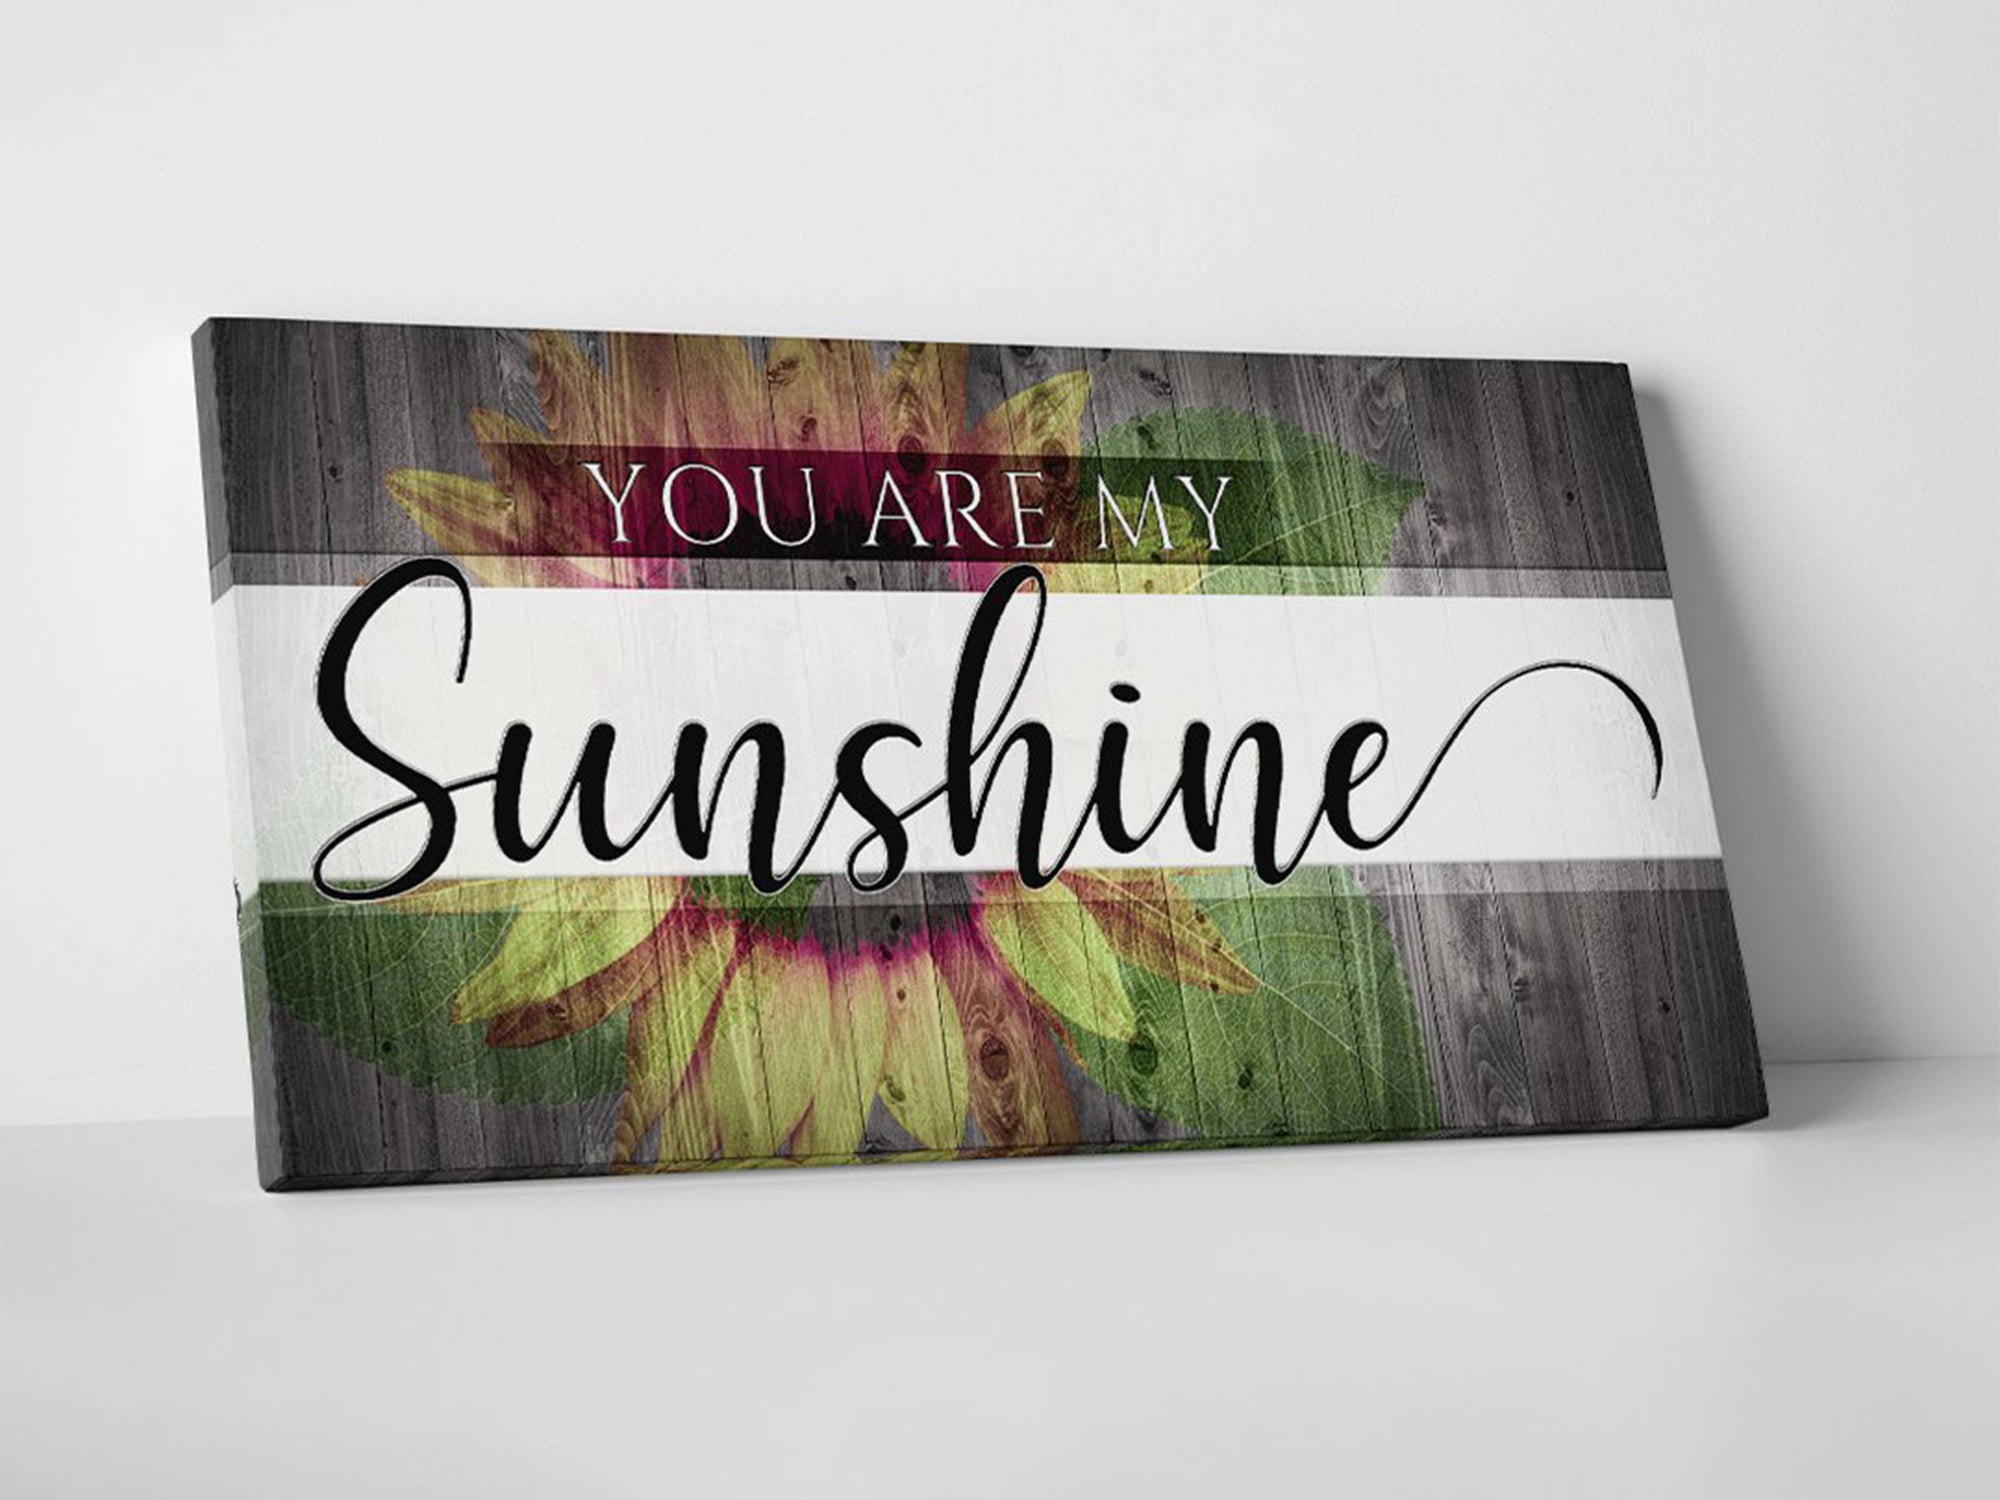 You Are My Sunshine - Bedroom - Canvas Wall Art